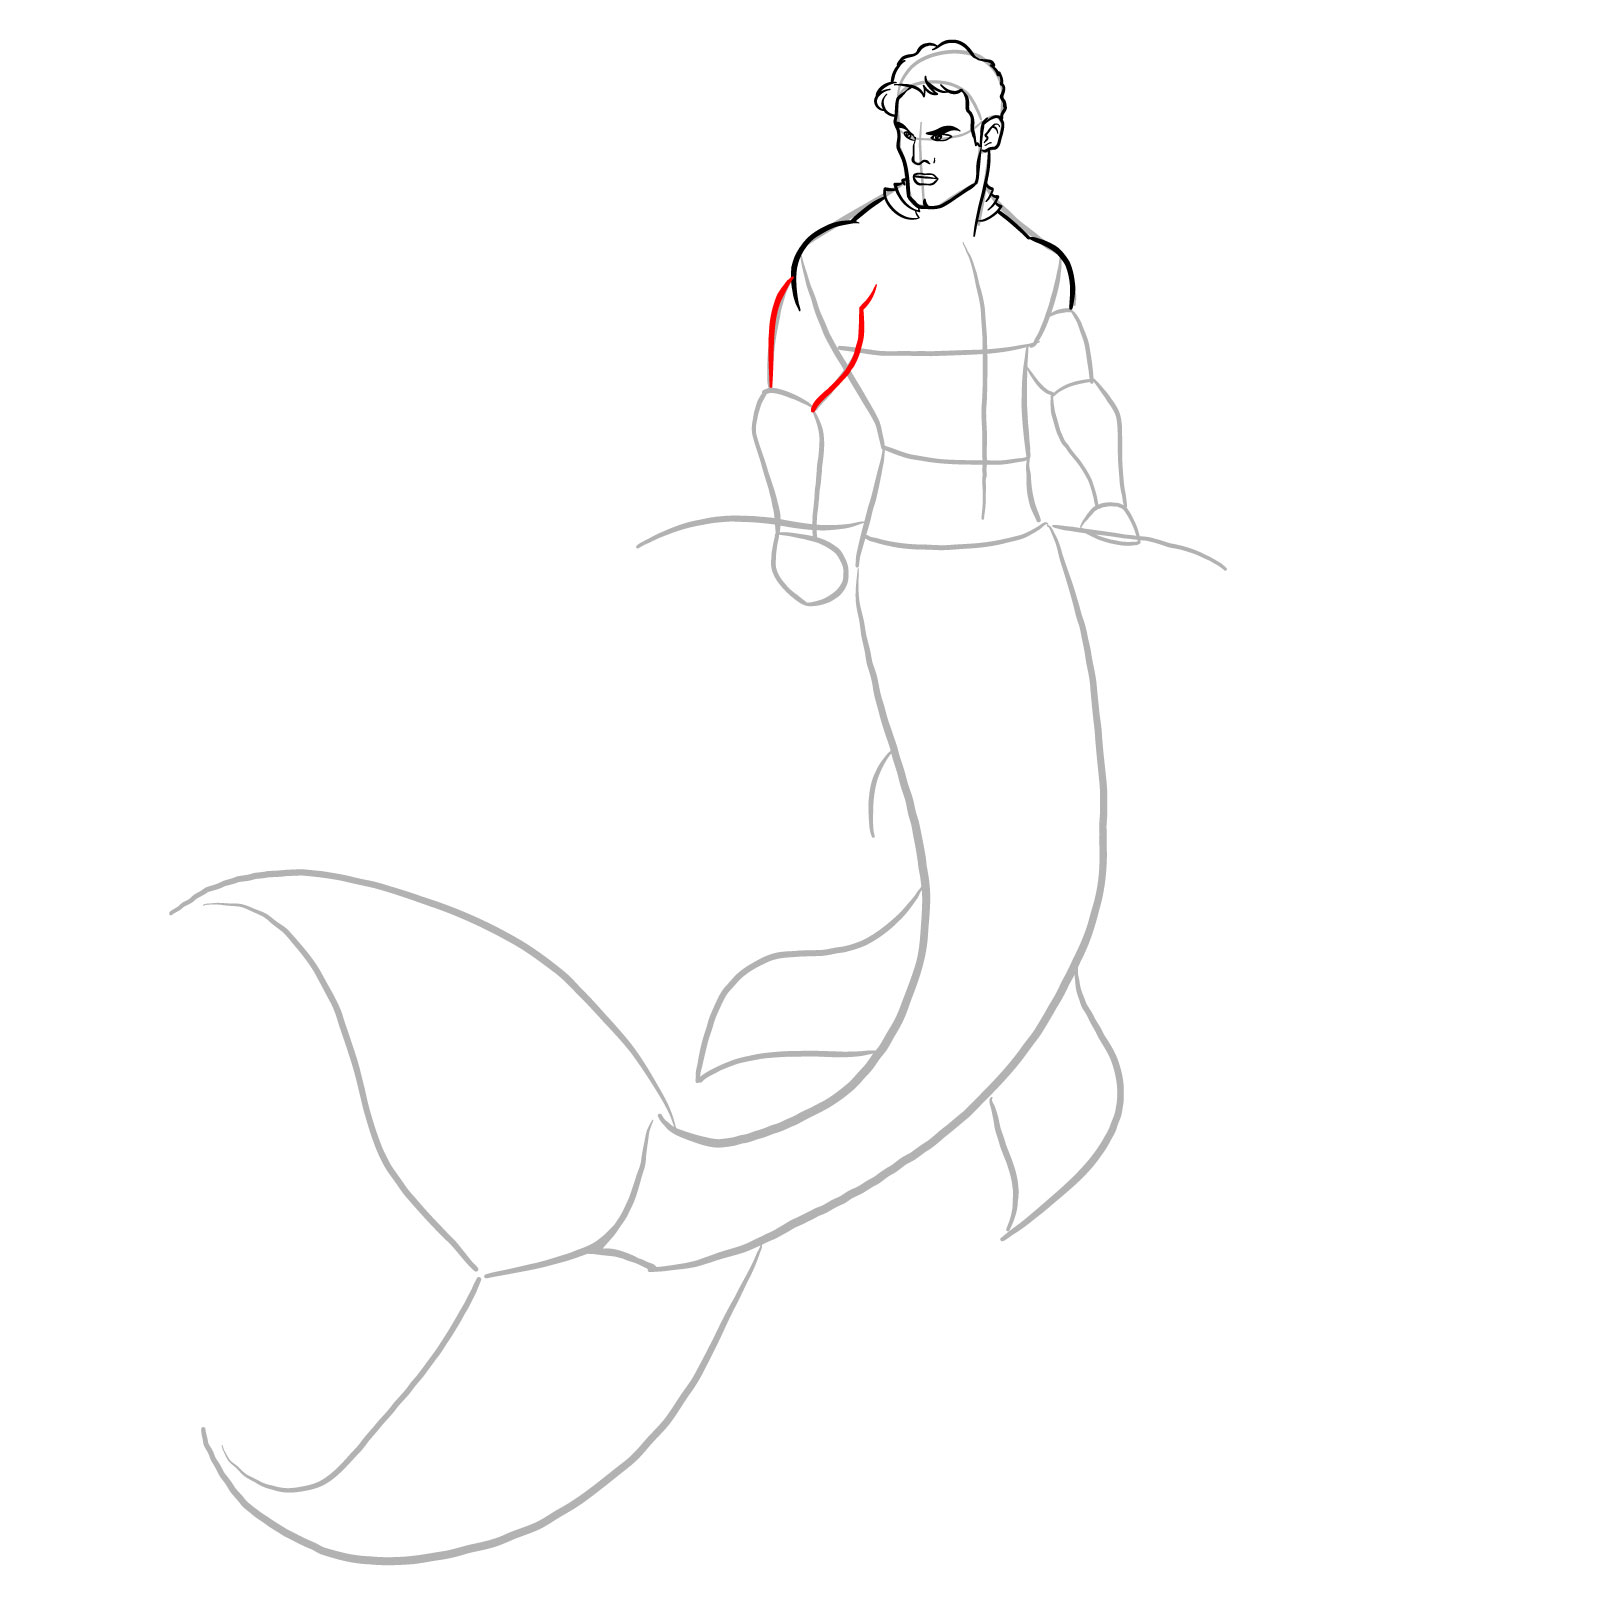 How to draw a Merman - step 13